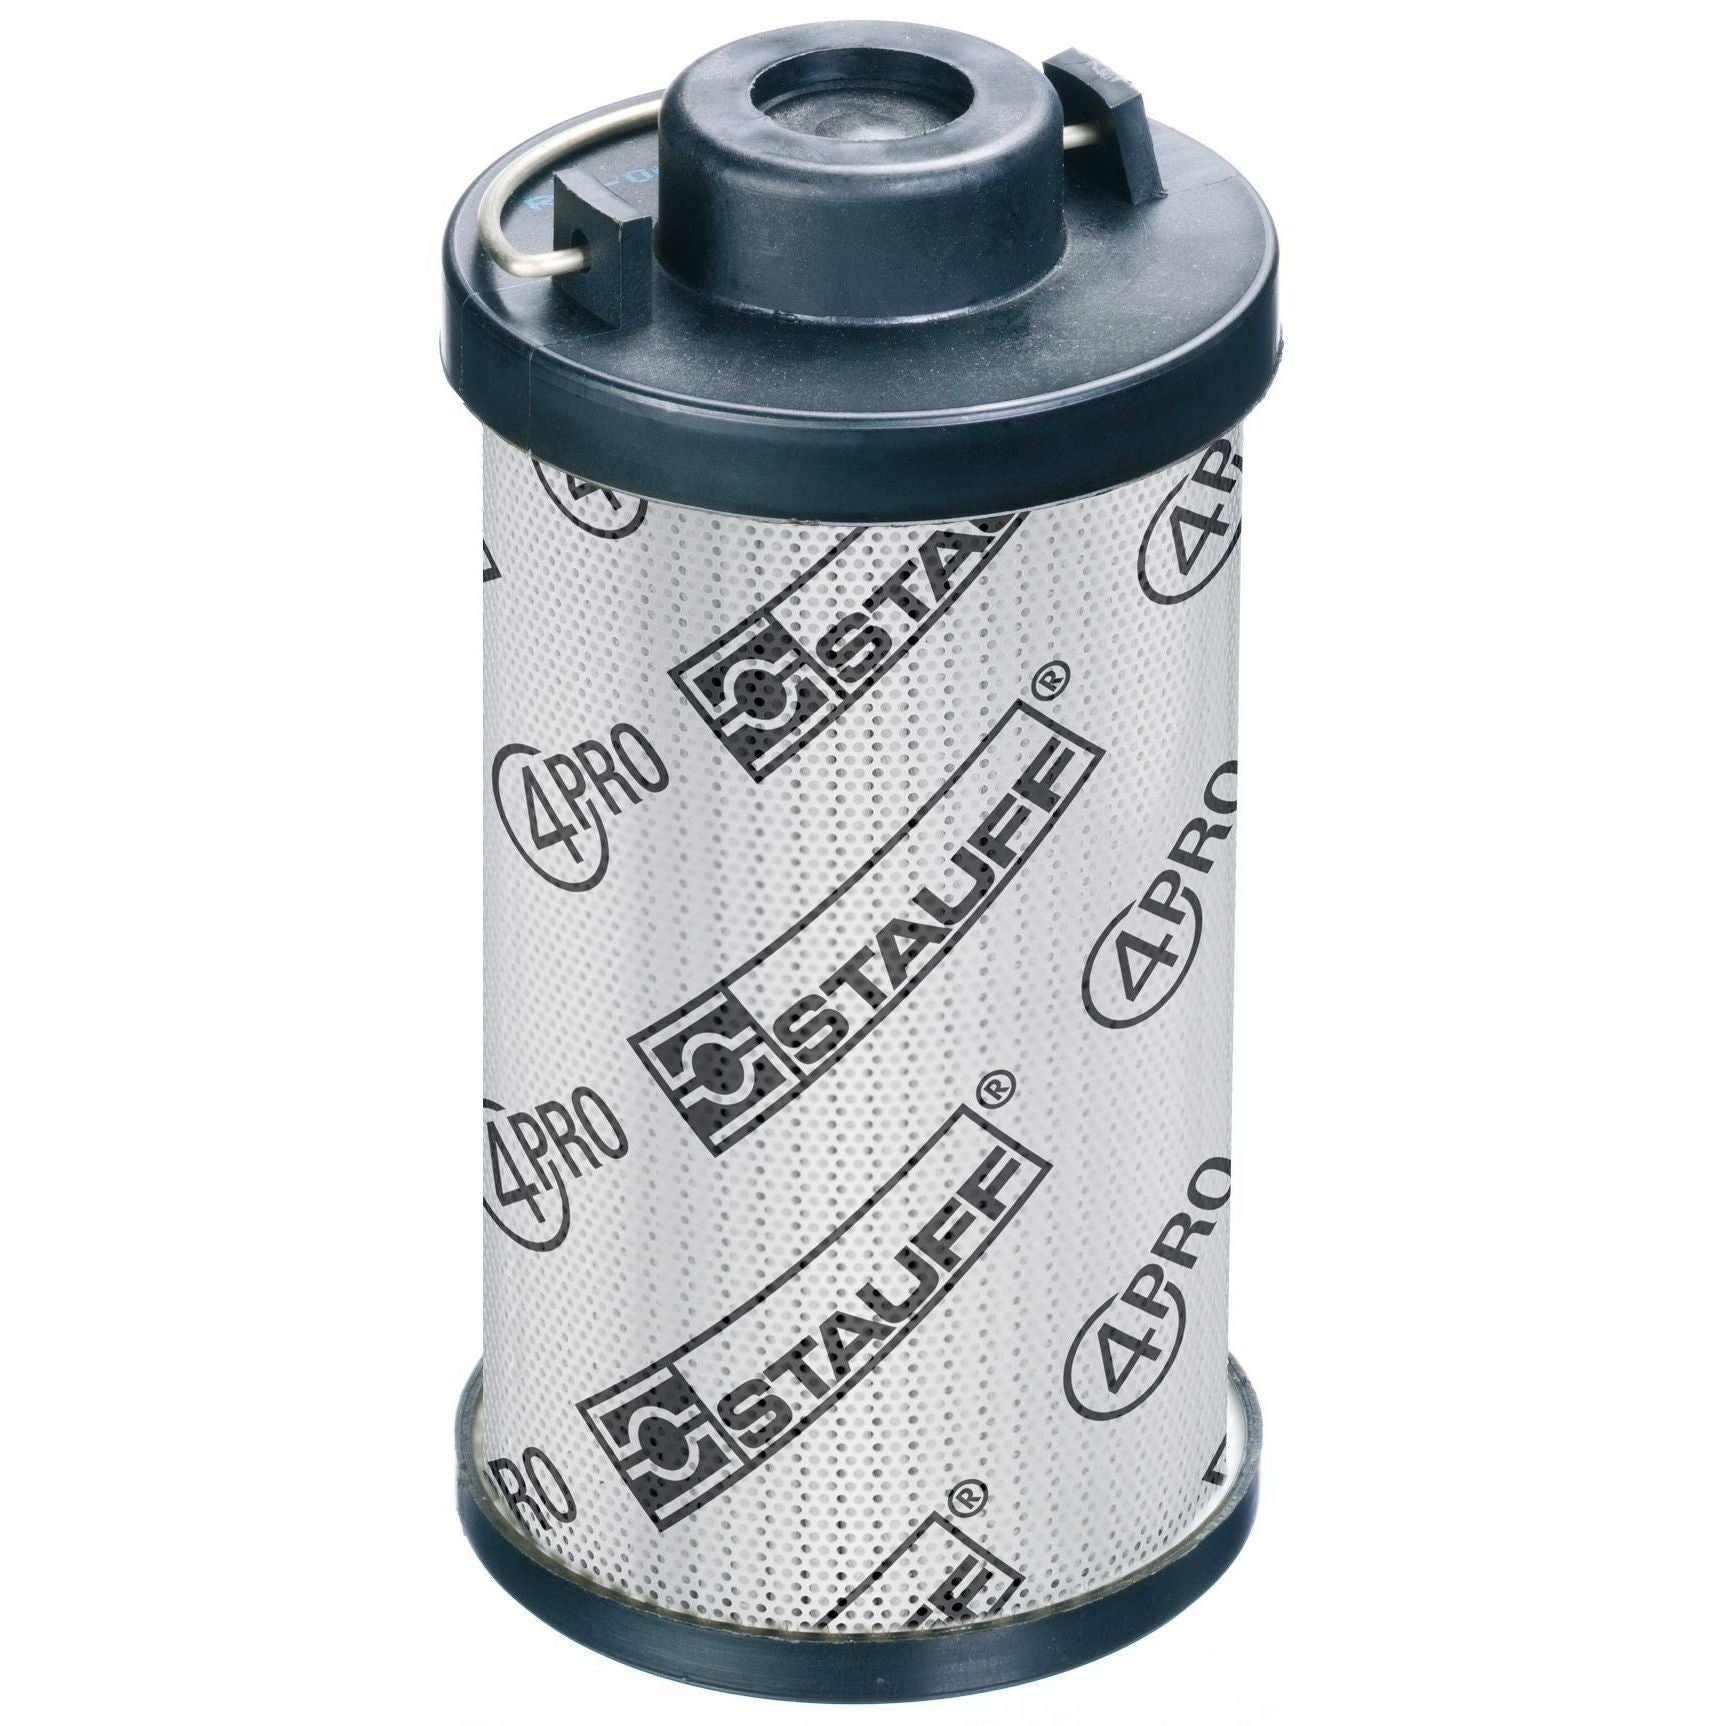 RE-240G10B/2 : Stauff RF-240 Series Filter Element, 10 Micron, Synthetic, 363psi Collapse Differential, Buna